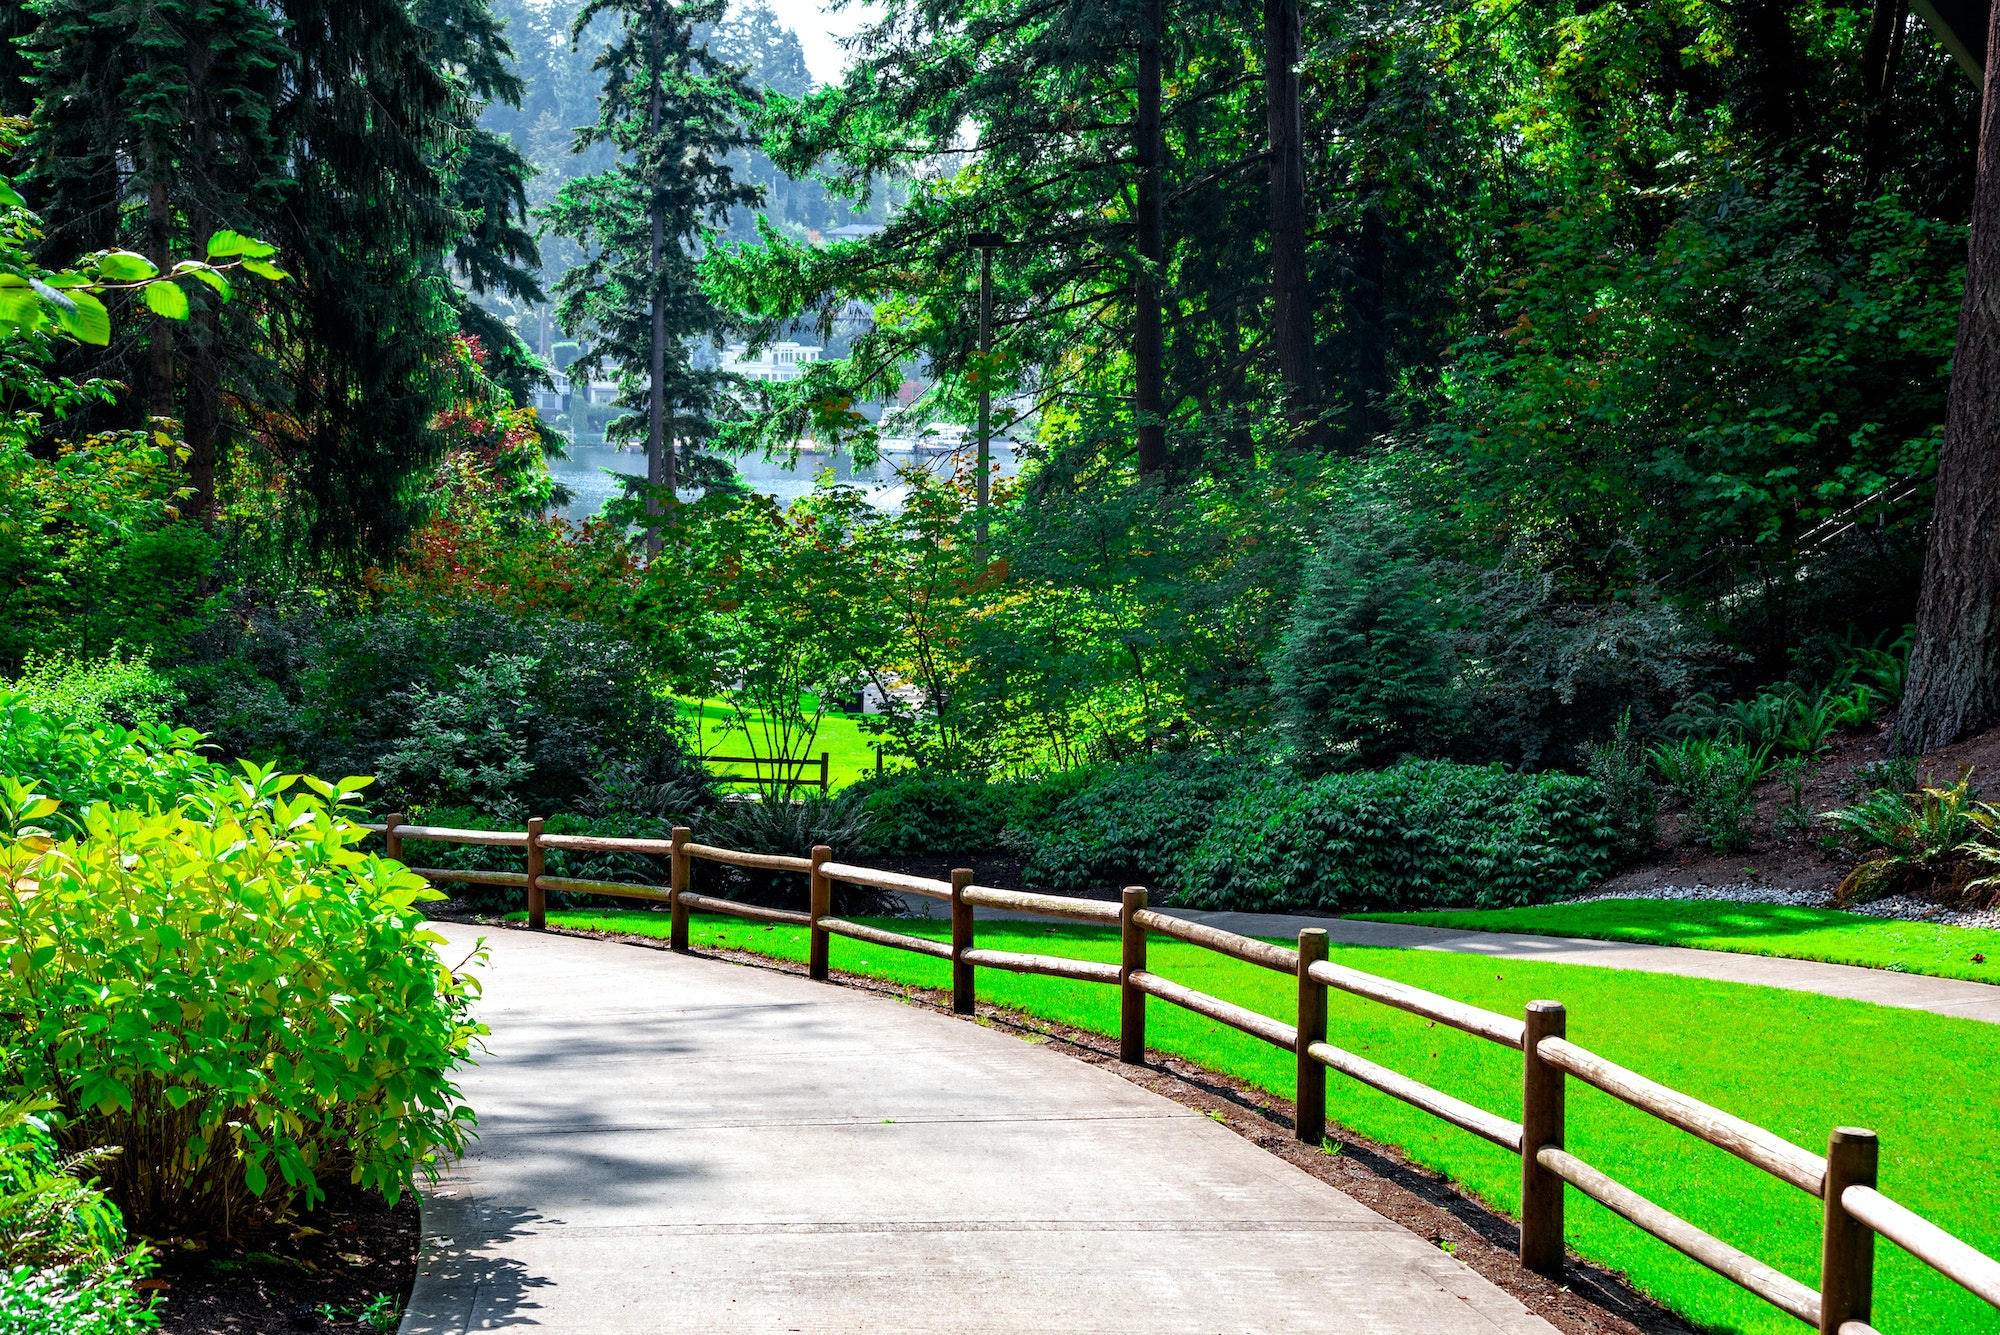 A beautiful wooden fence running along a paved driveway through lush green lawn and tree landscaping